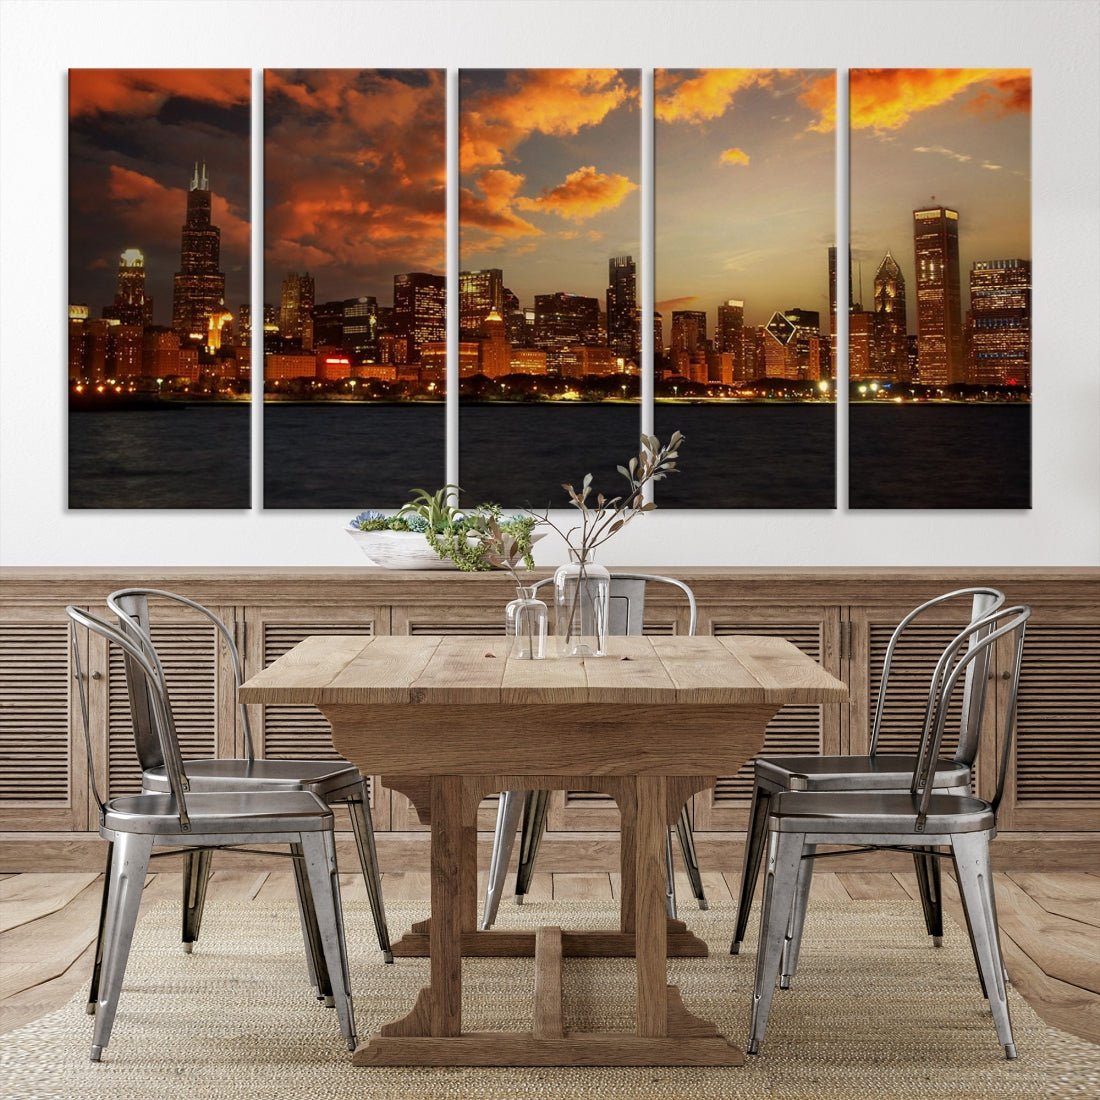 Chicago City Lights Sunset Orange Cloudy Skyline Cityscape View Large Wall Art Canvas Print